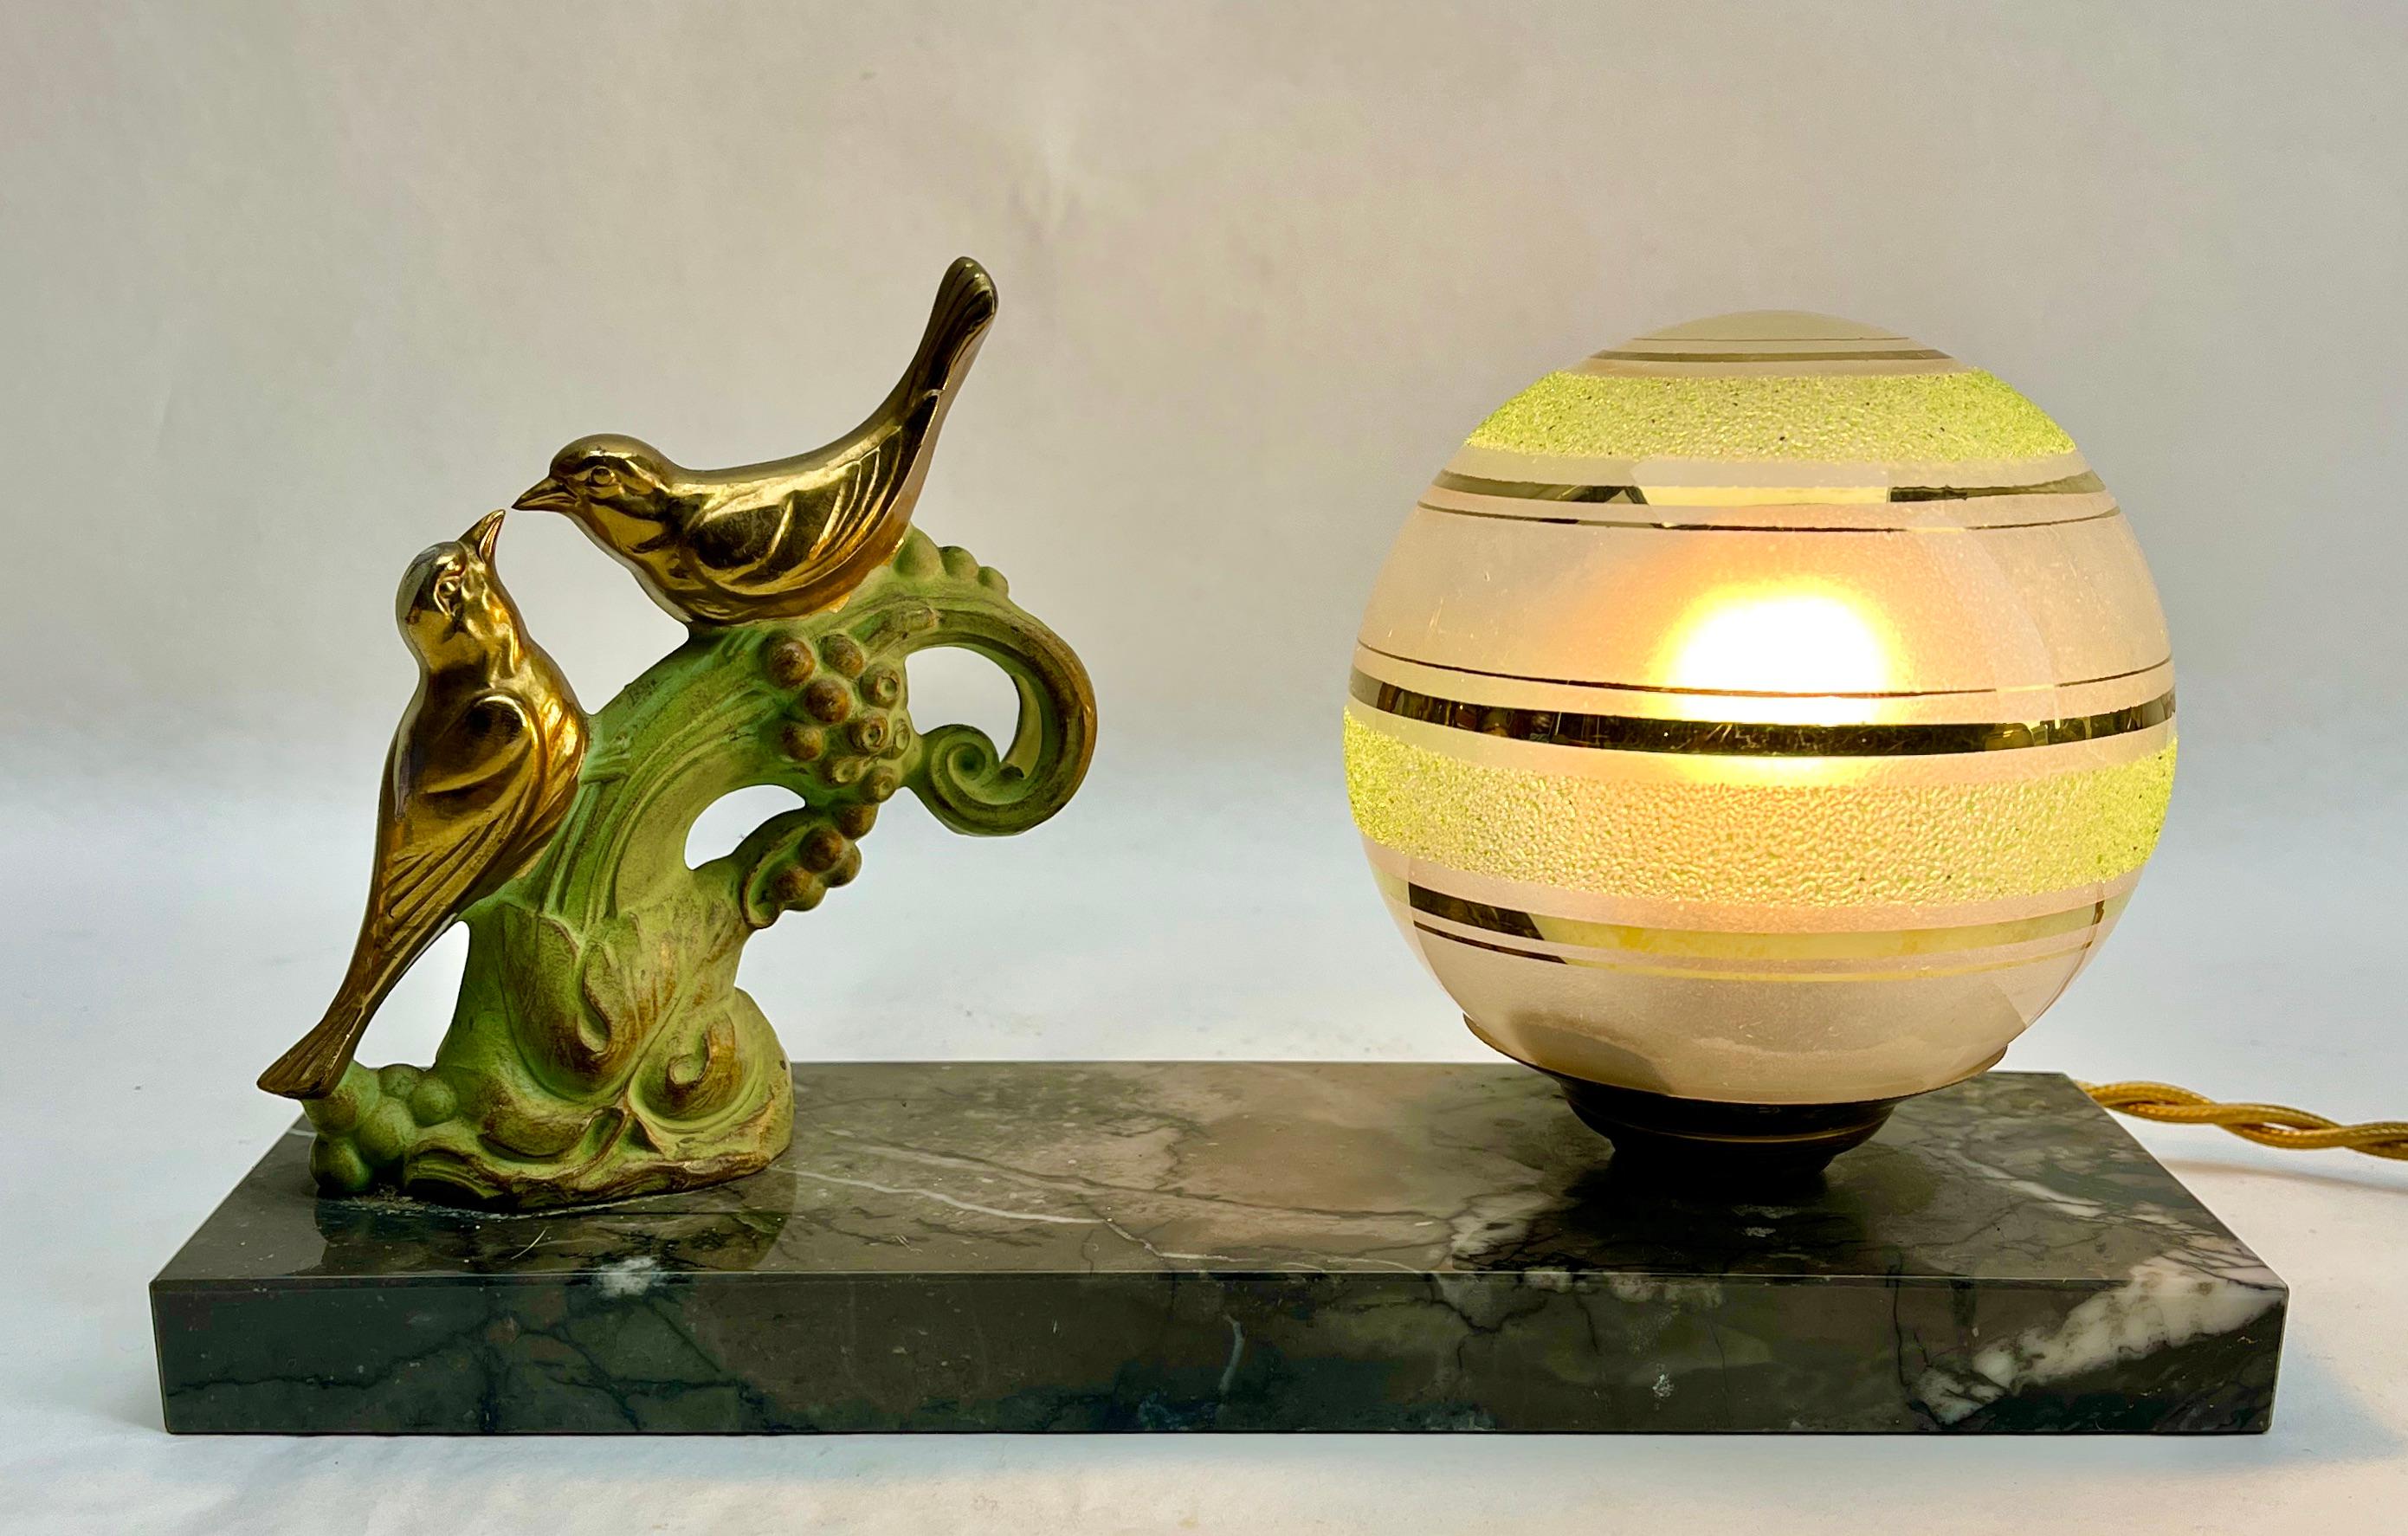 Stunning French Art Deco table lamp Gorgeous glass globe shade.
With Spelter Birds motif. Sitting on a marble base. 
In excellent condition and in full working order. 
Rewiring and New Fitting E14
Originel Patina on all Parts
The piece is in